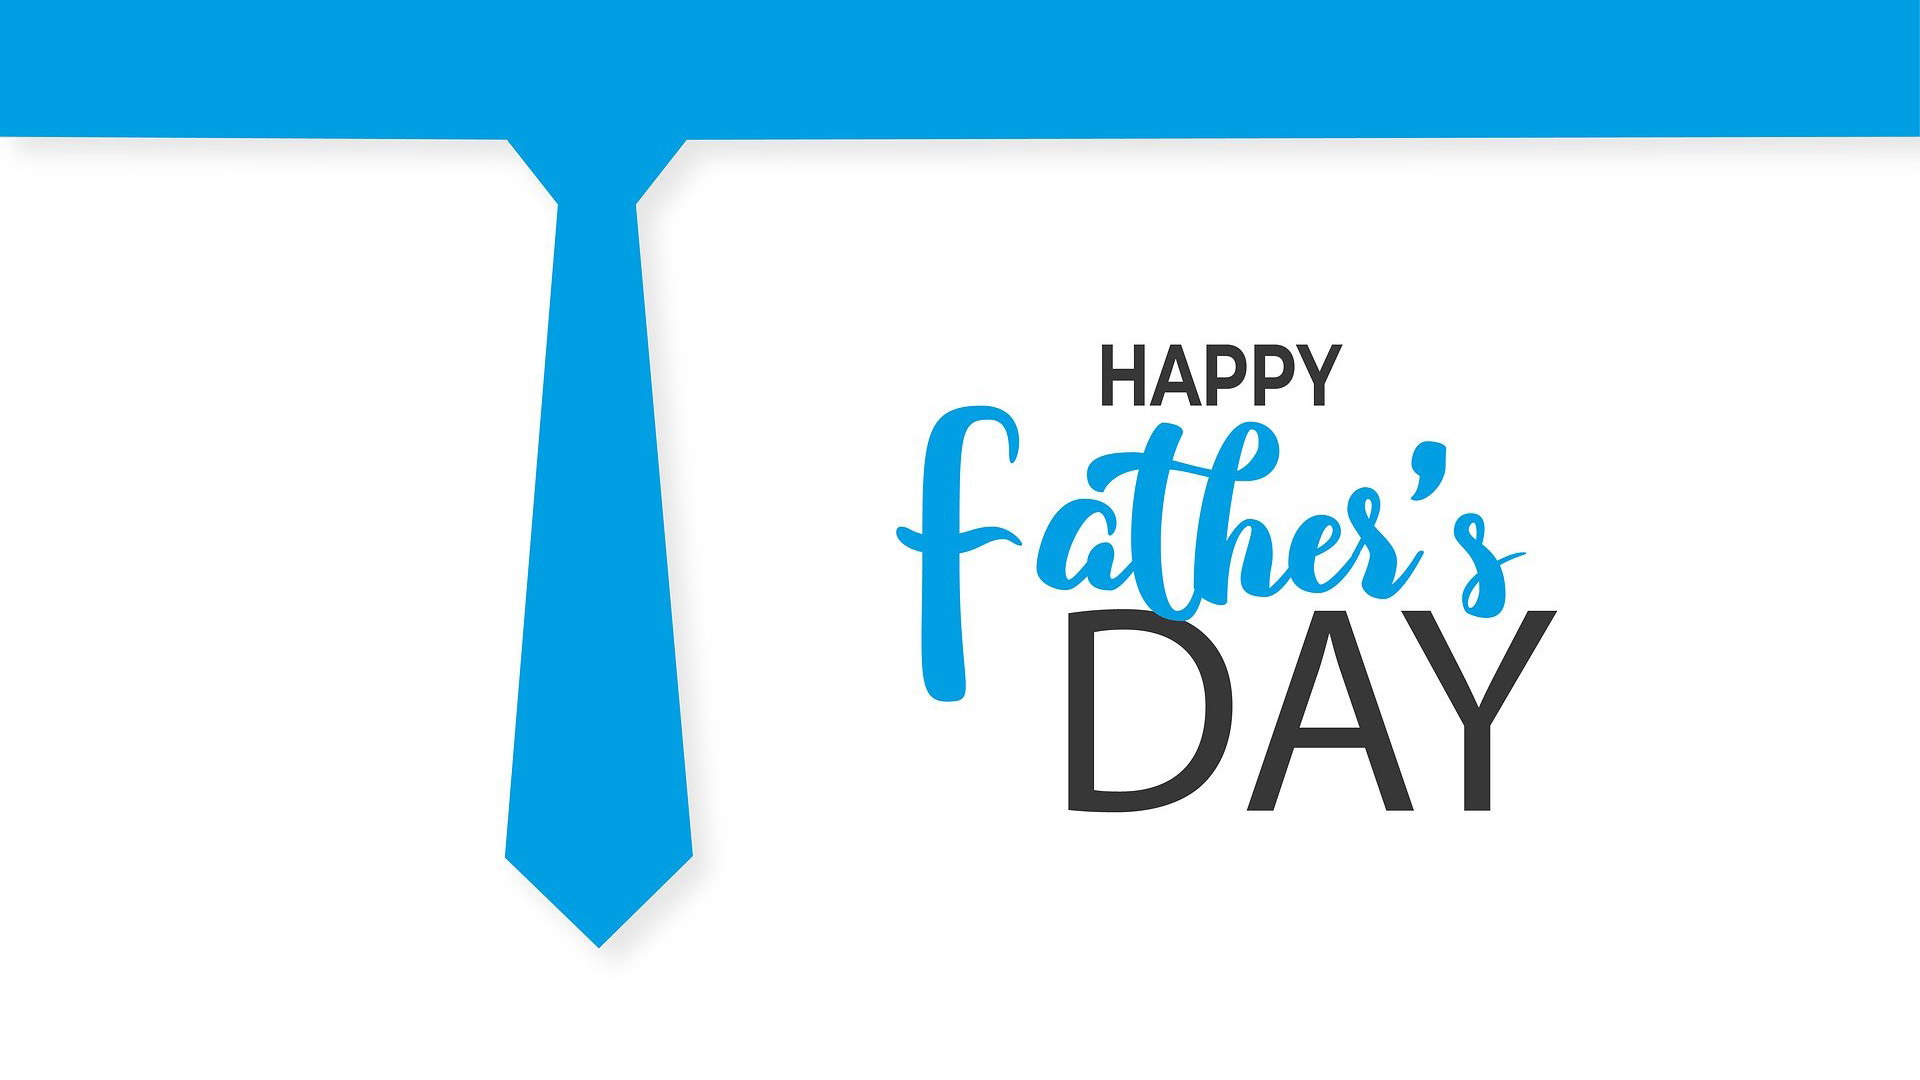 White background with blue bar across the top of the graphic. A blue illustrated tie is dropped down from the blue bar at the top. on the right of the graphic it reads Happy Father's Day.